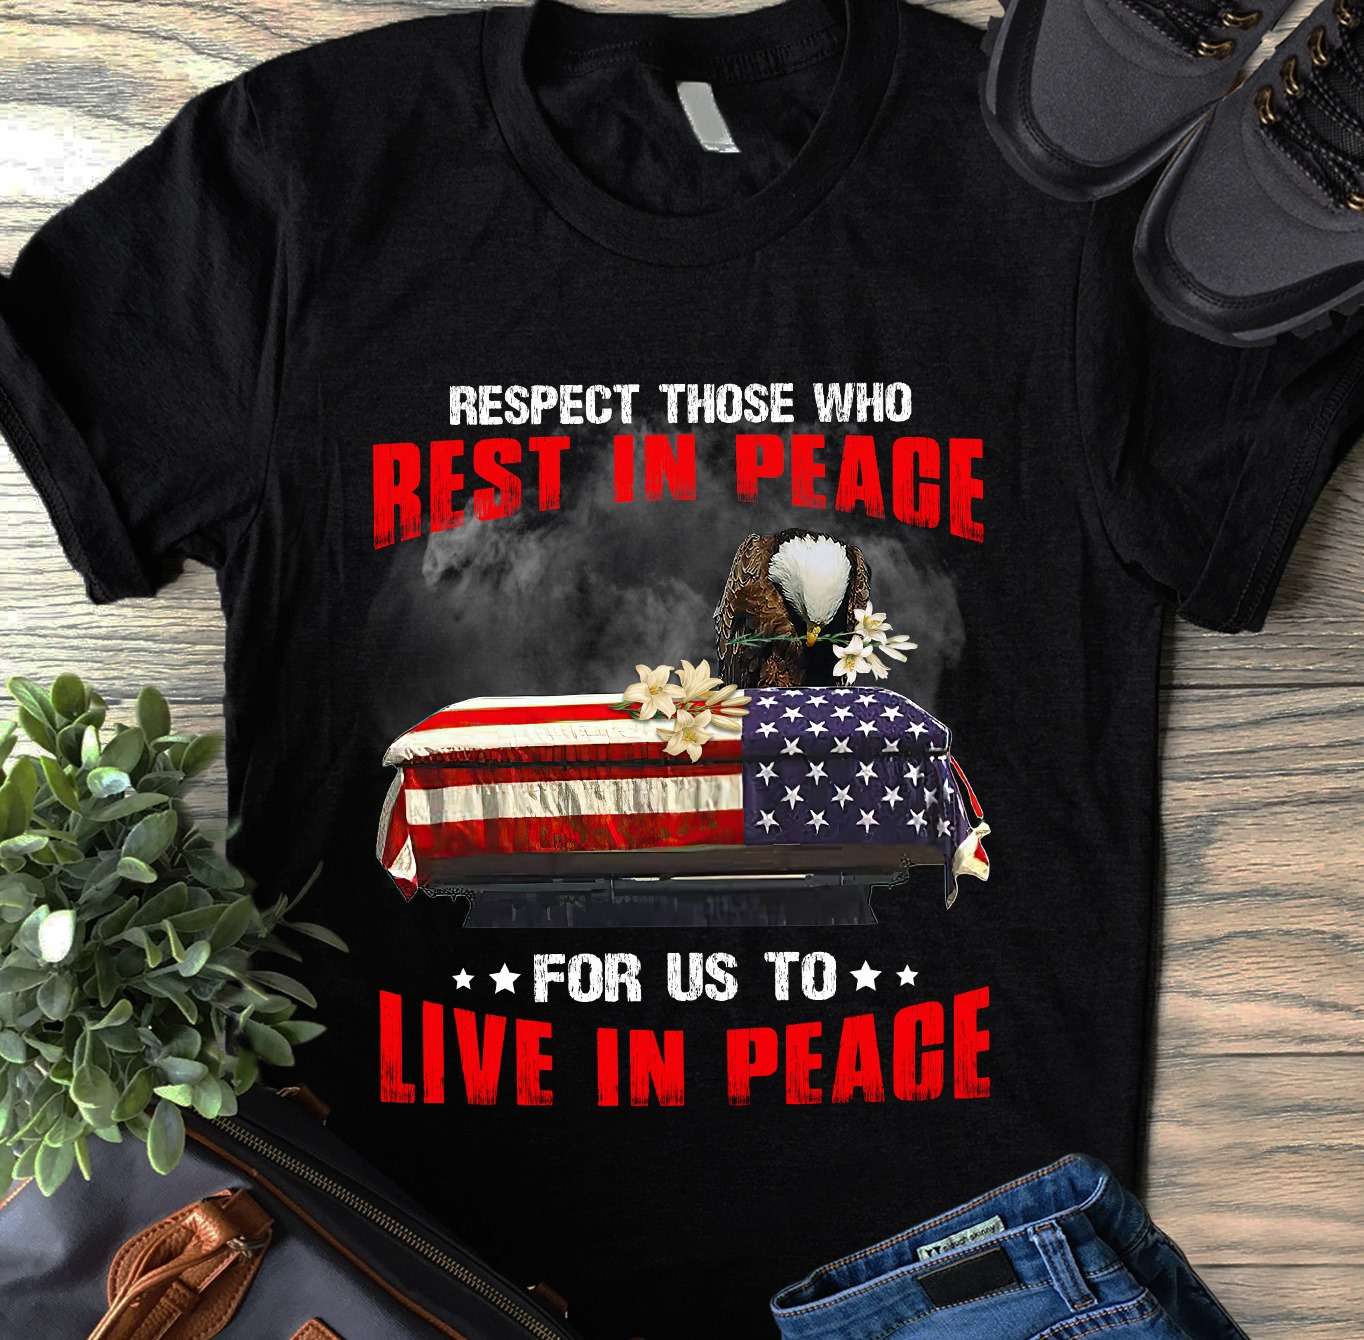 Respect those who rest in peace for us to live in peace - American soldiers, eagle America country